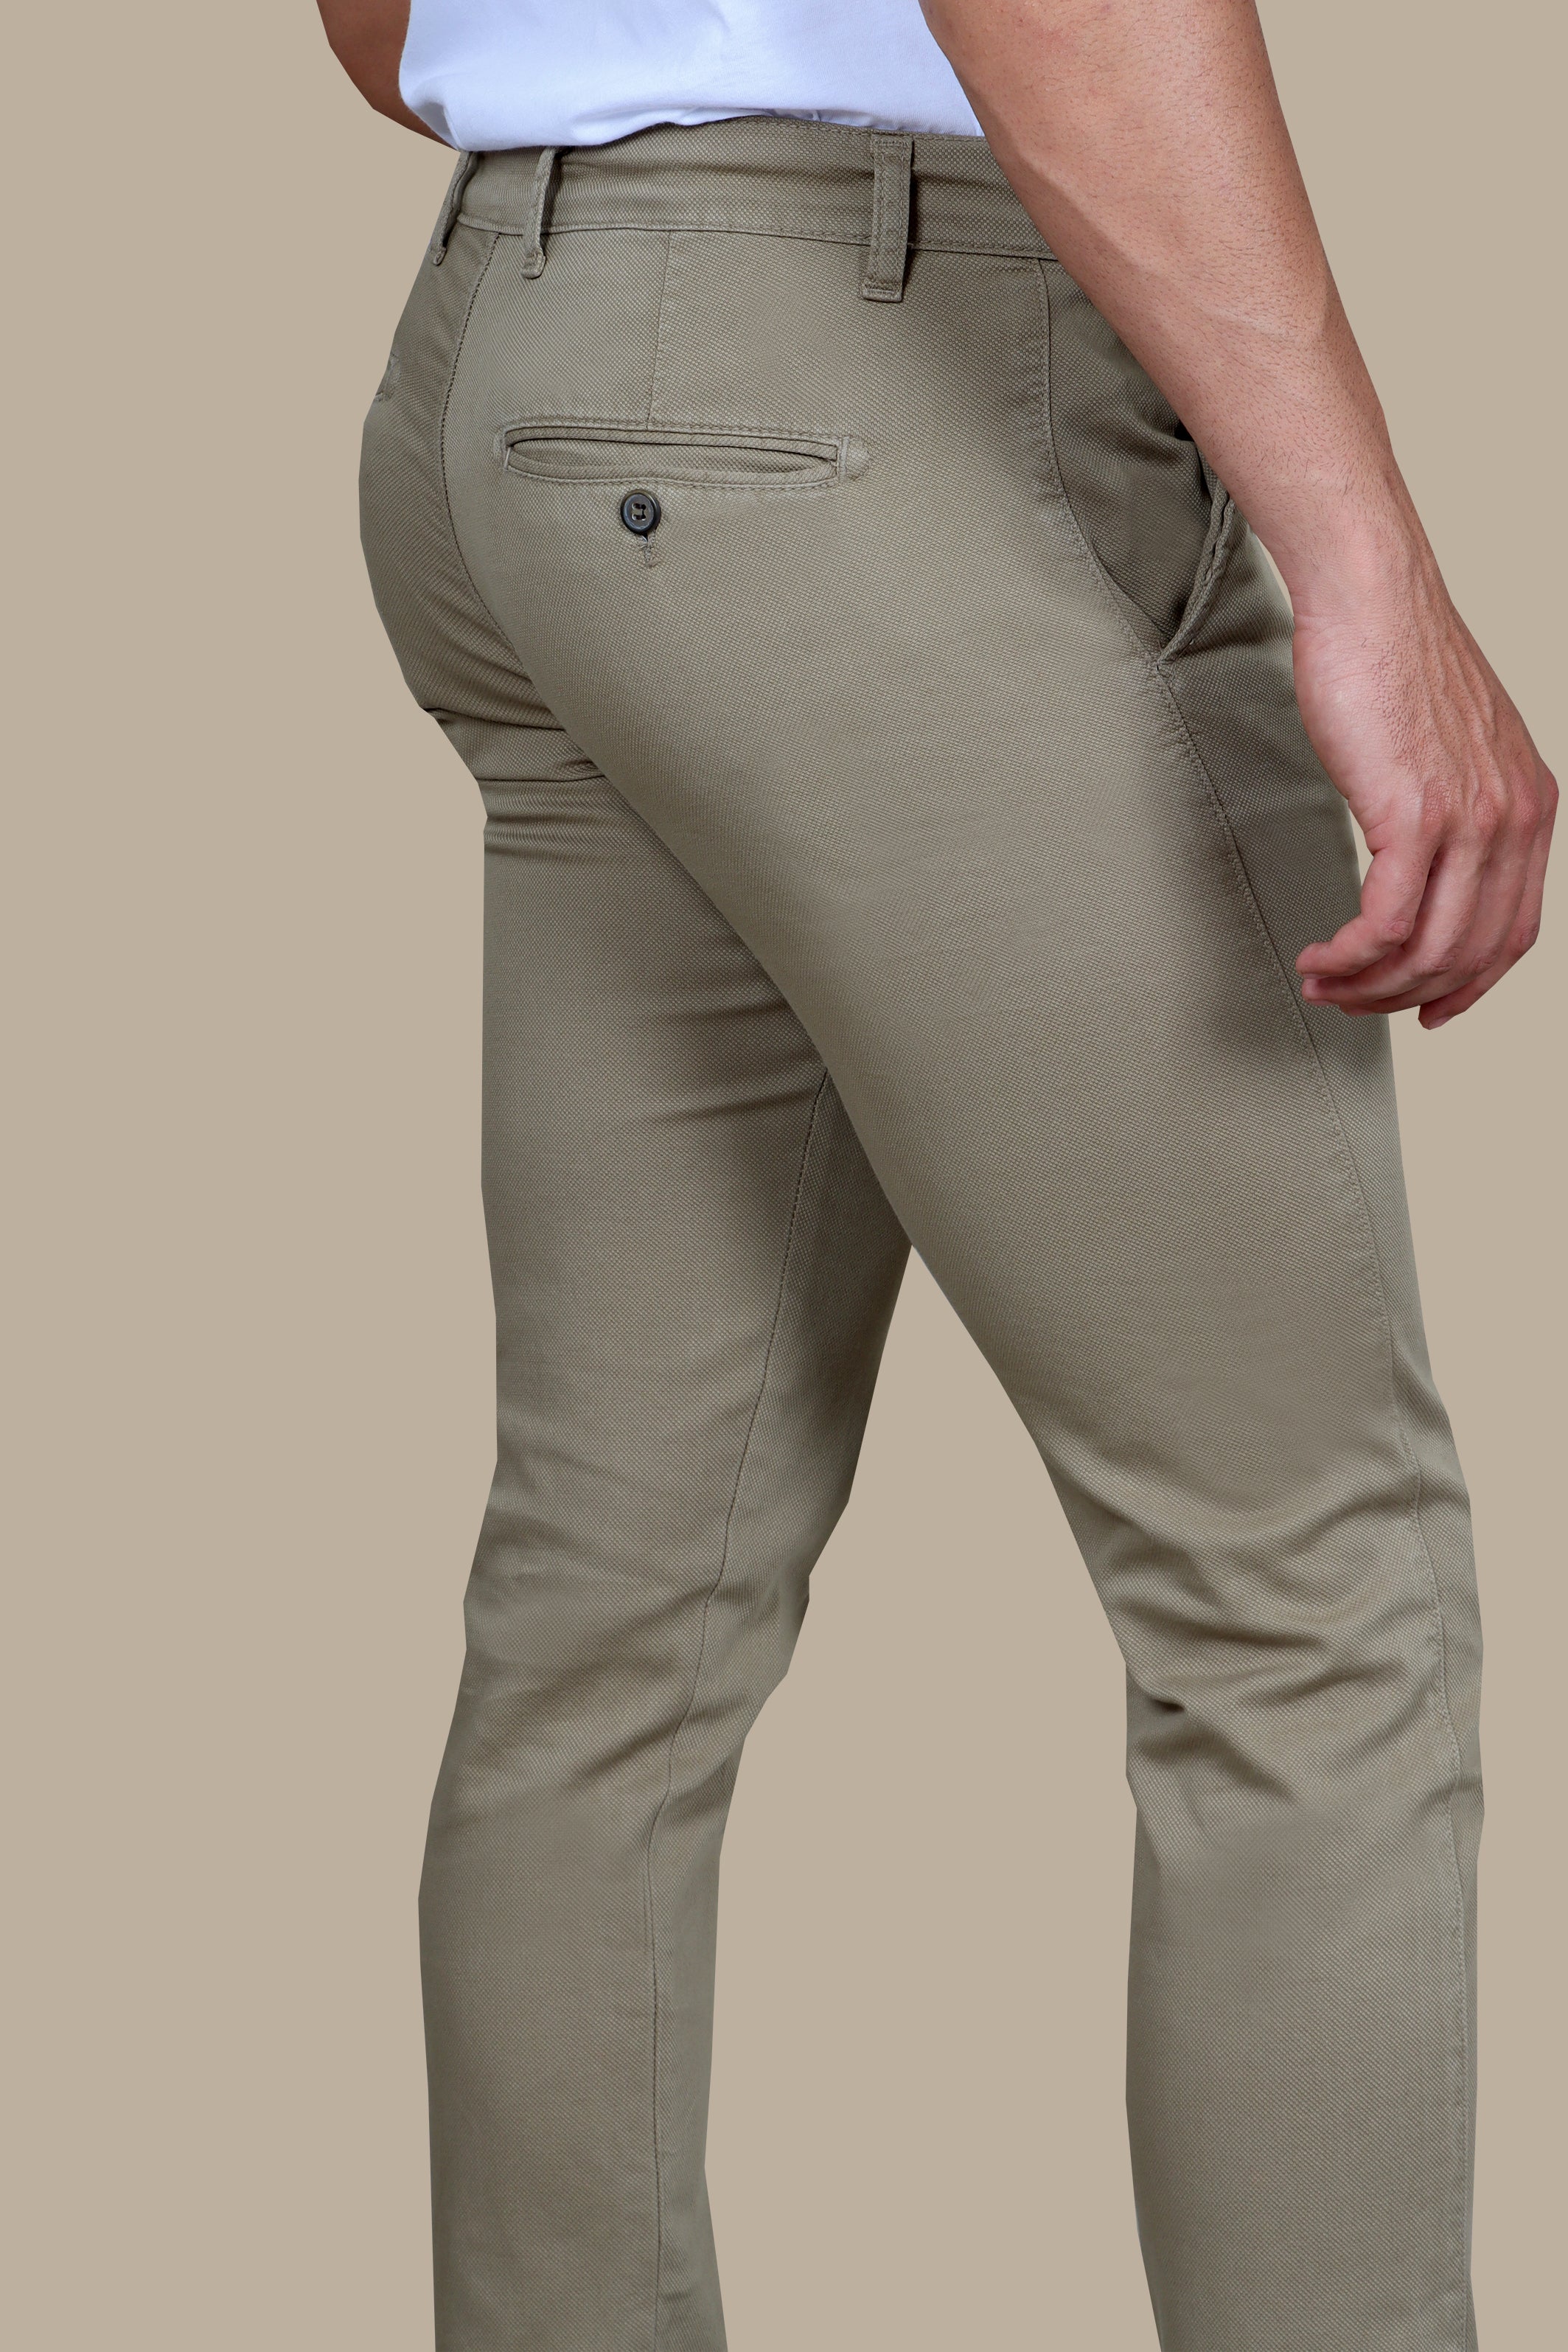 Oxford Slim Fit Chino in Olive Green